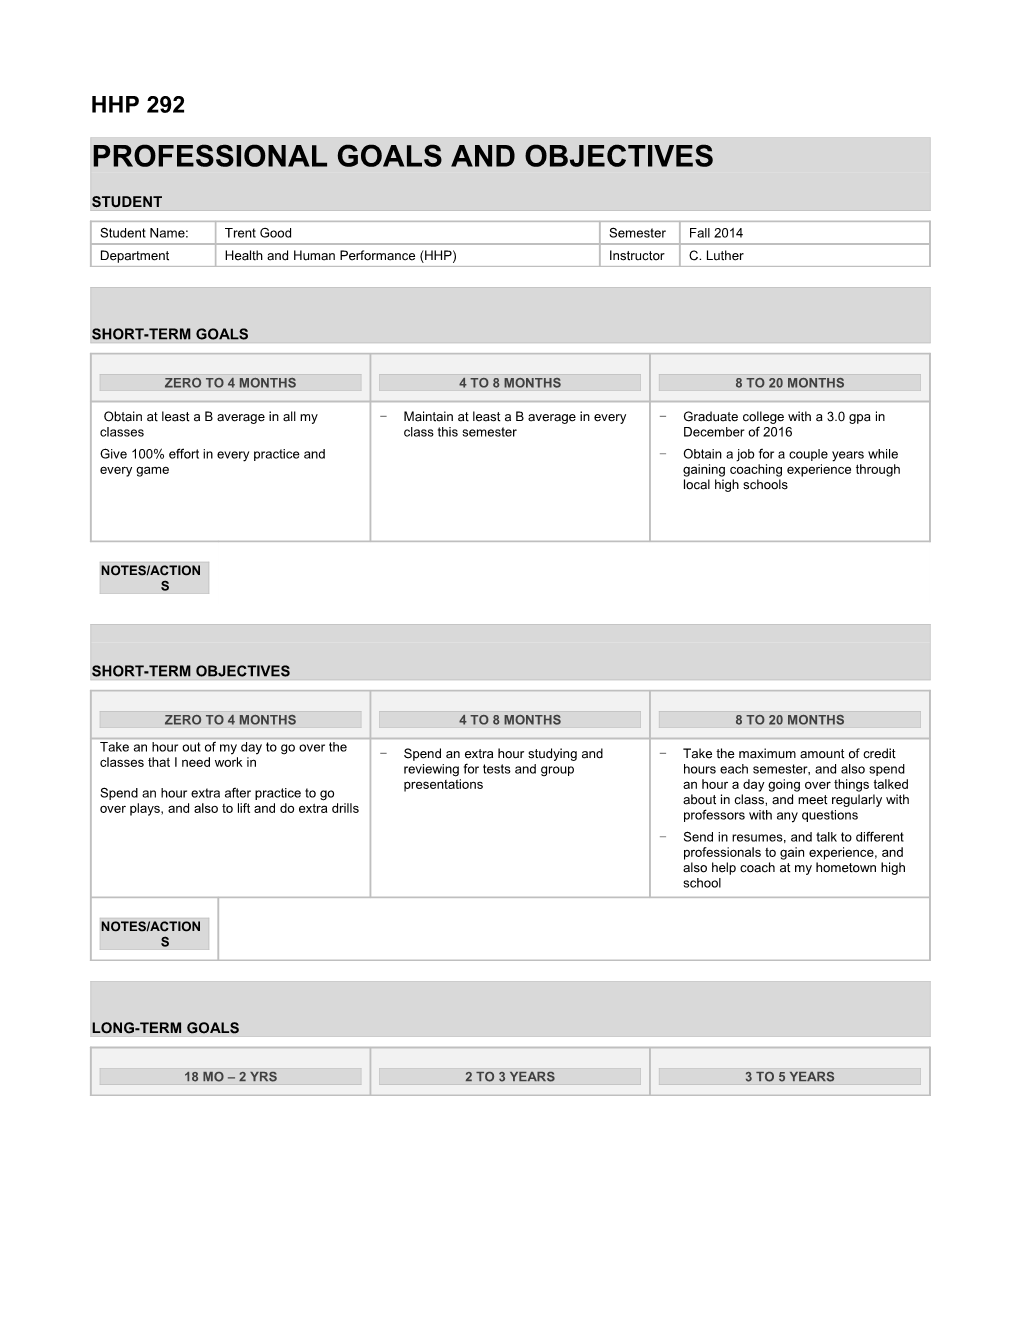 Professional Goals and Objectives